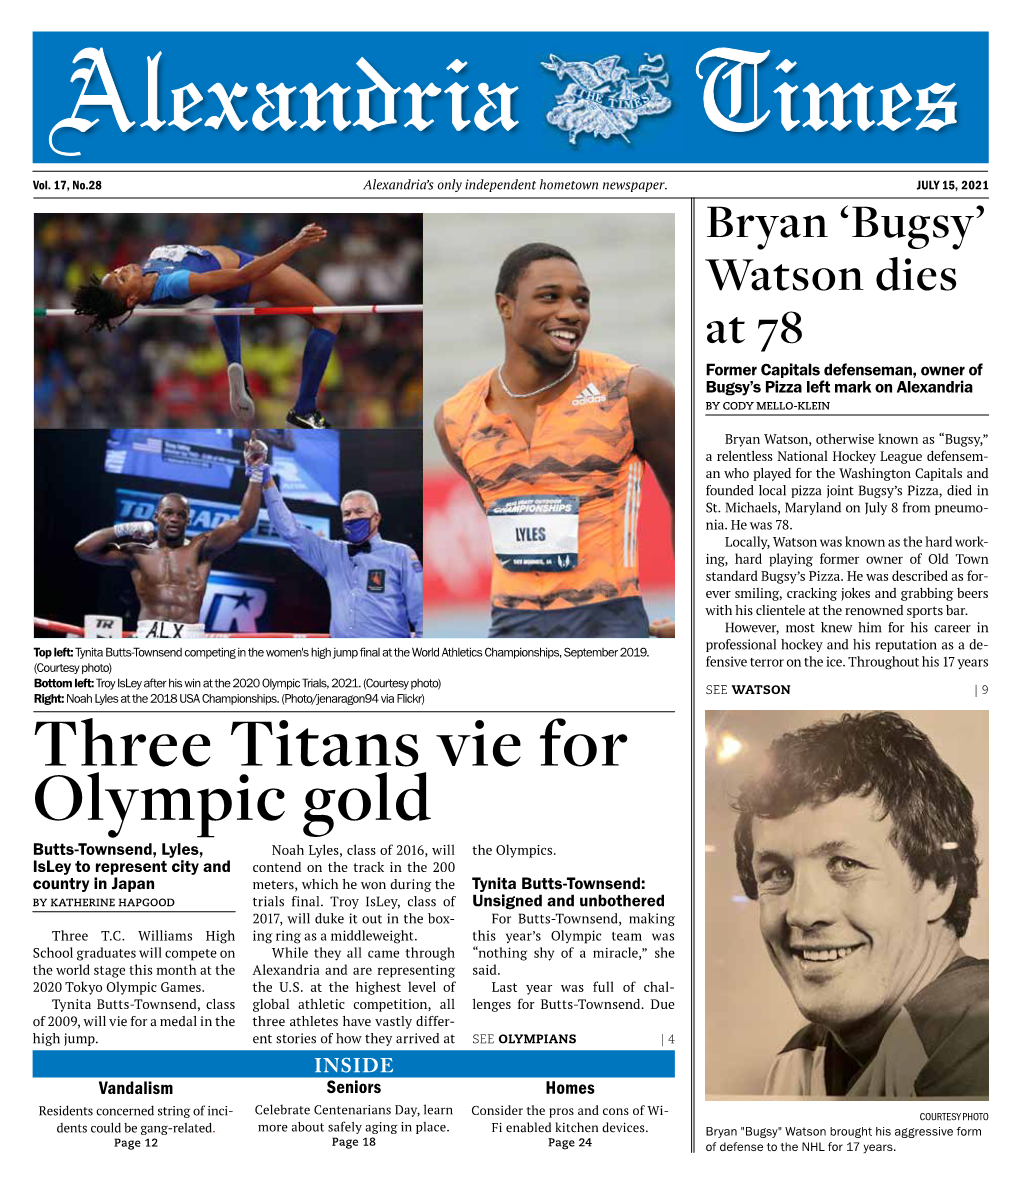 Three Titans Vie for Olympic Gold Butts-Townsend, Lyles, Noah Lyles, Class of 2016, Will the Olympics